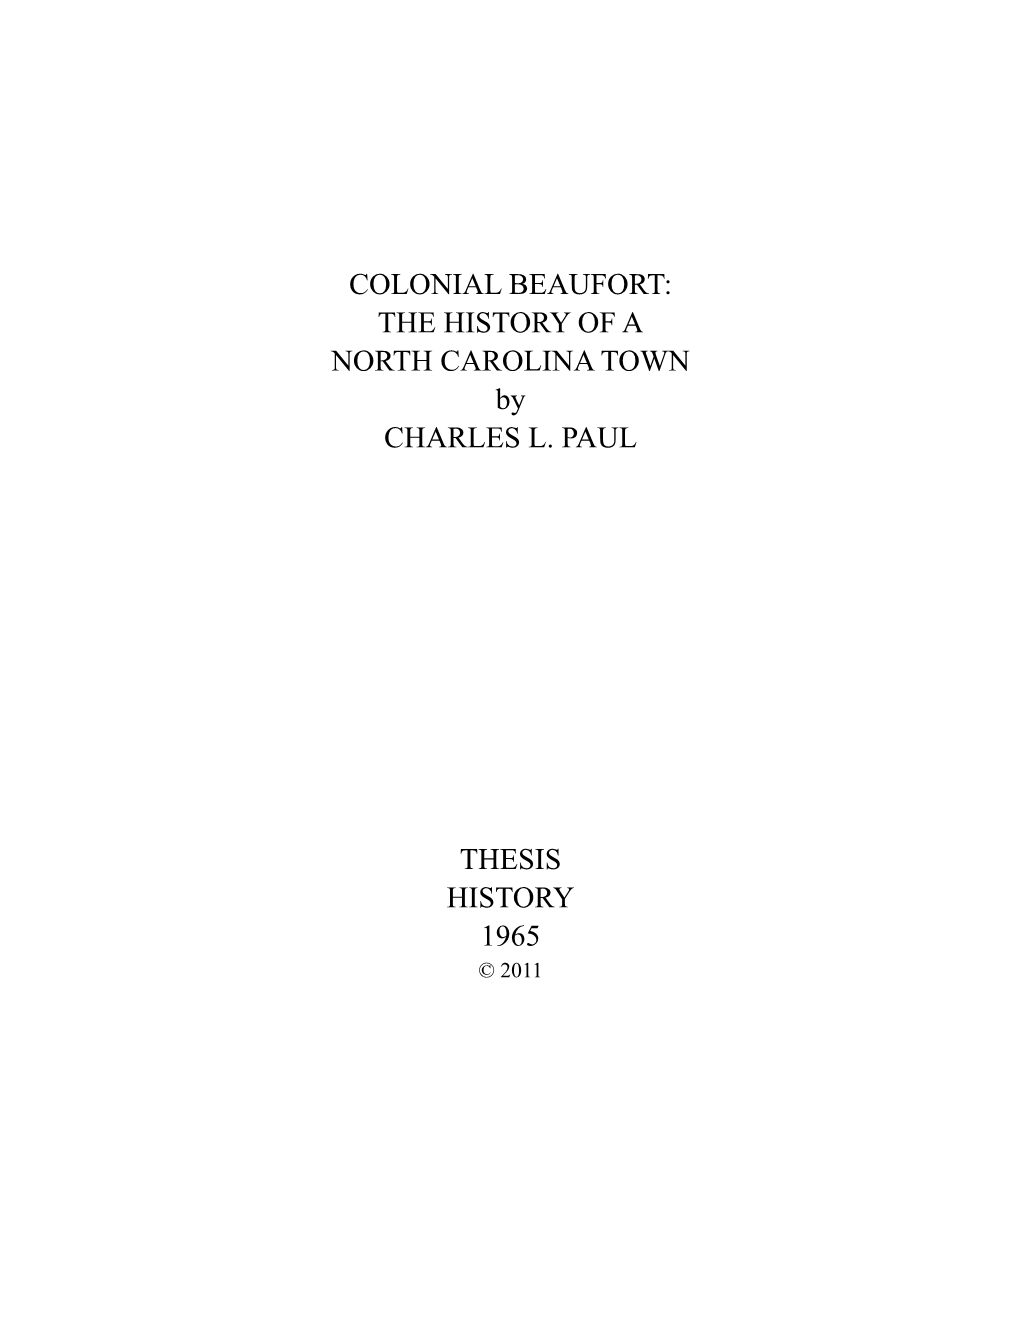 COLONIAL BEAUFORT: the HISTORY of a NORTH CAROLINA TOWN by CHARLES L